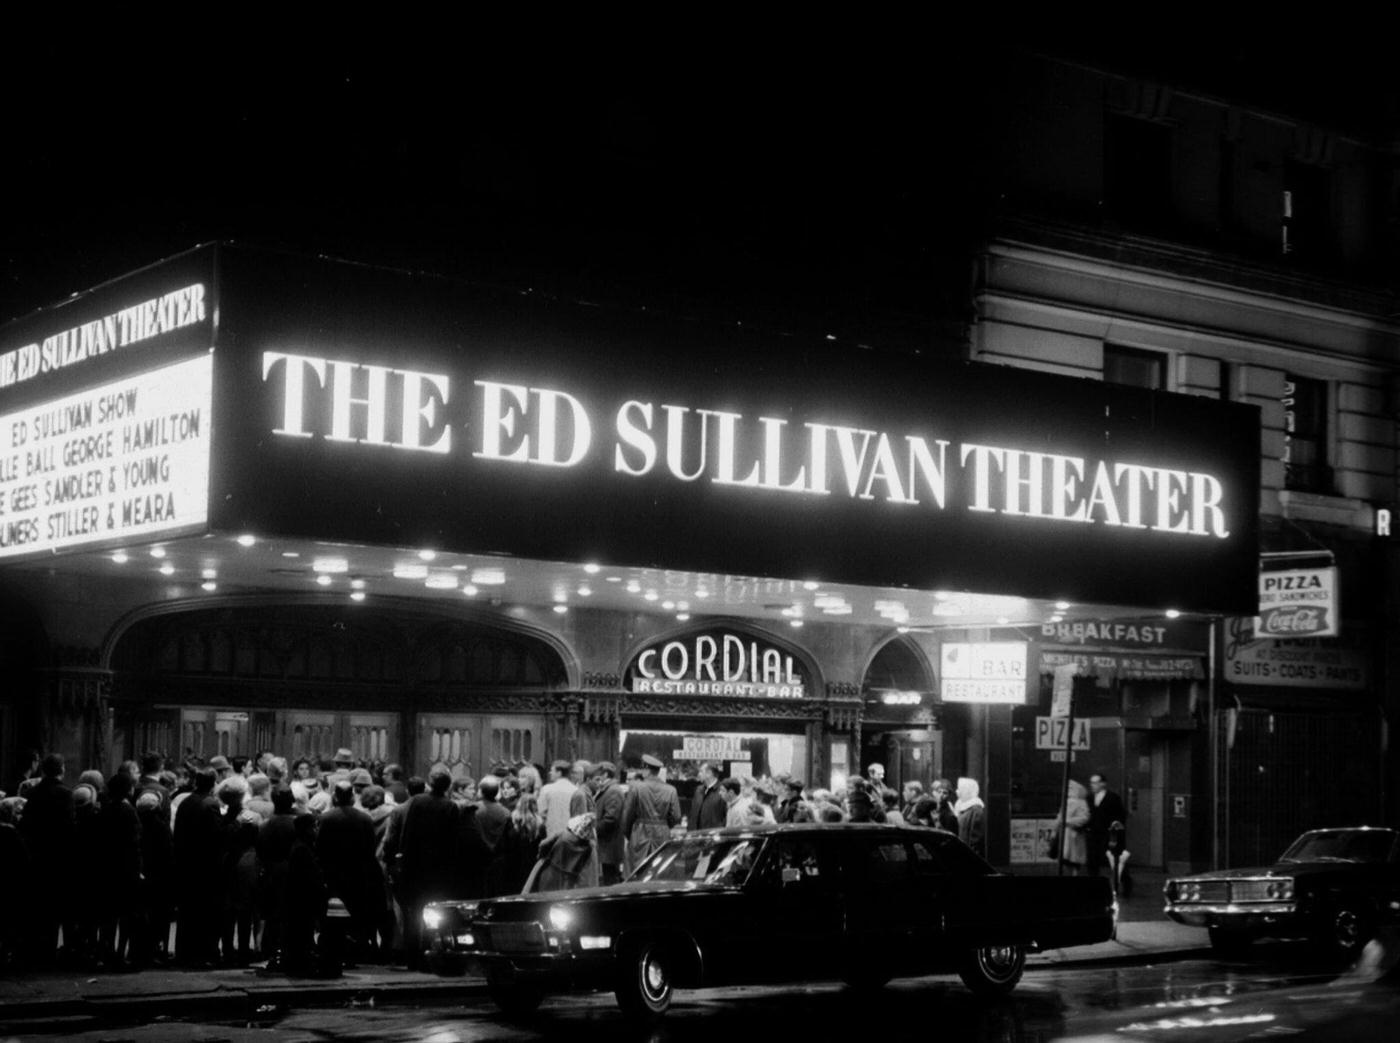 Crowd Gathers Outside The Ed Sullivan Theater At Broadway And 53Rd Street, Manhattan, 1968